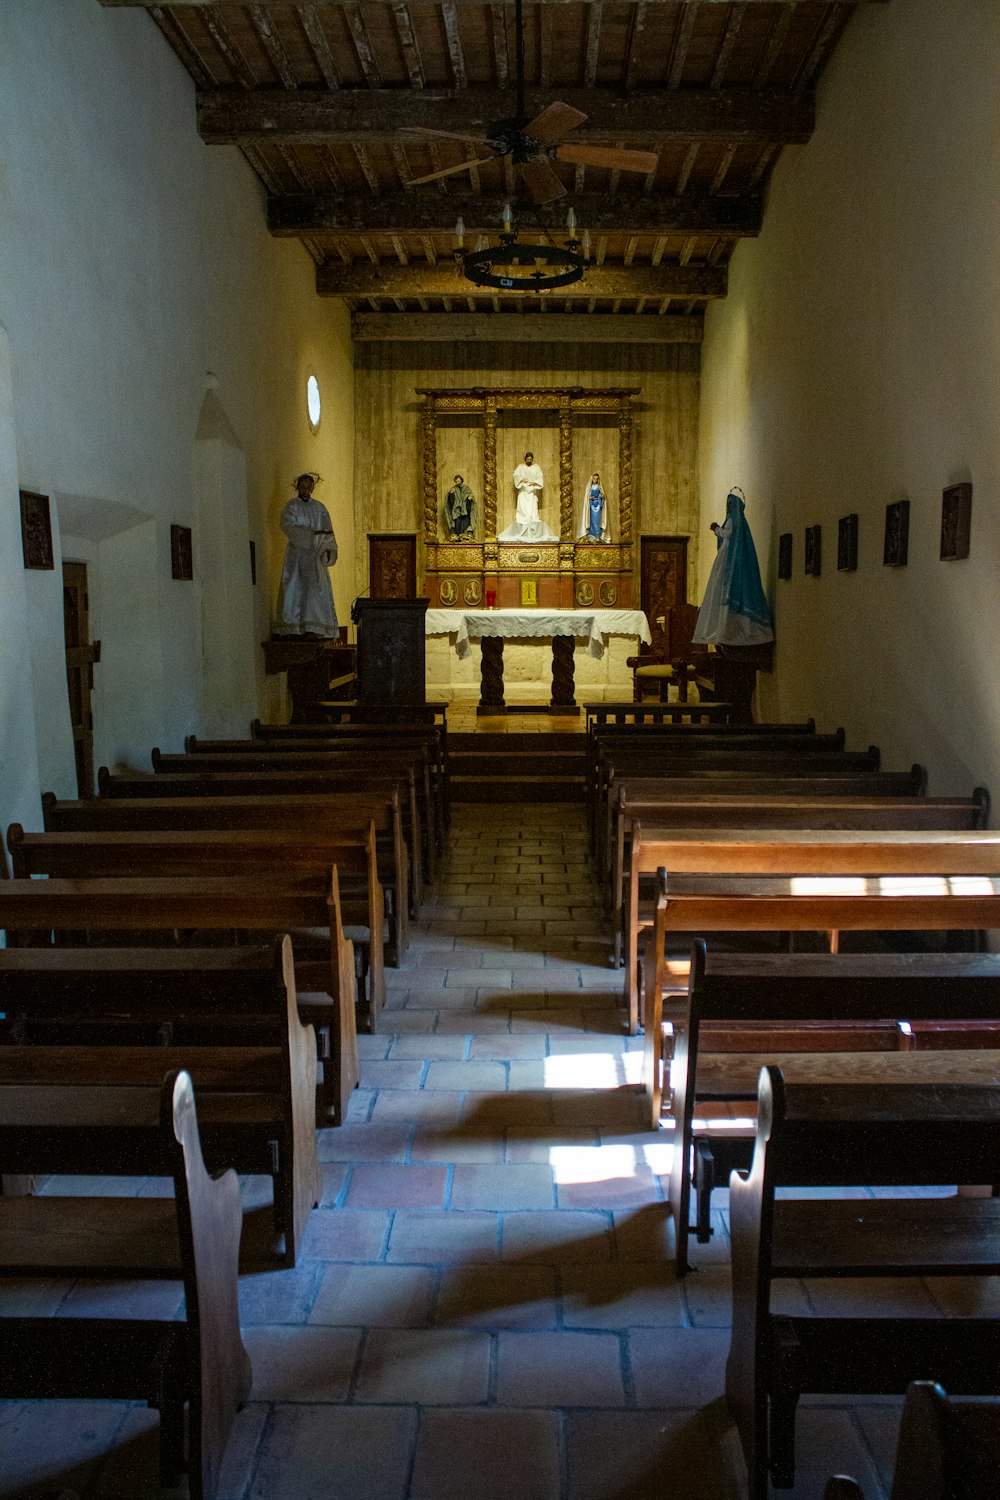 the inside of a church with pews and a statue